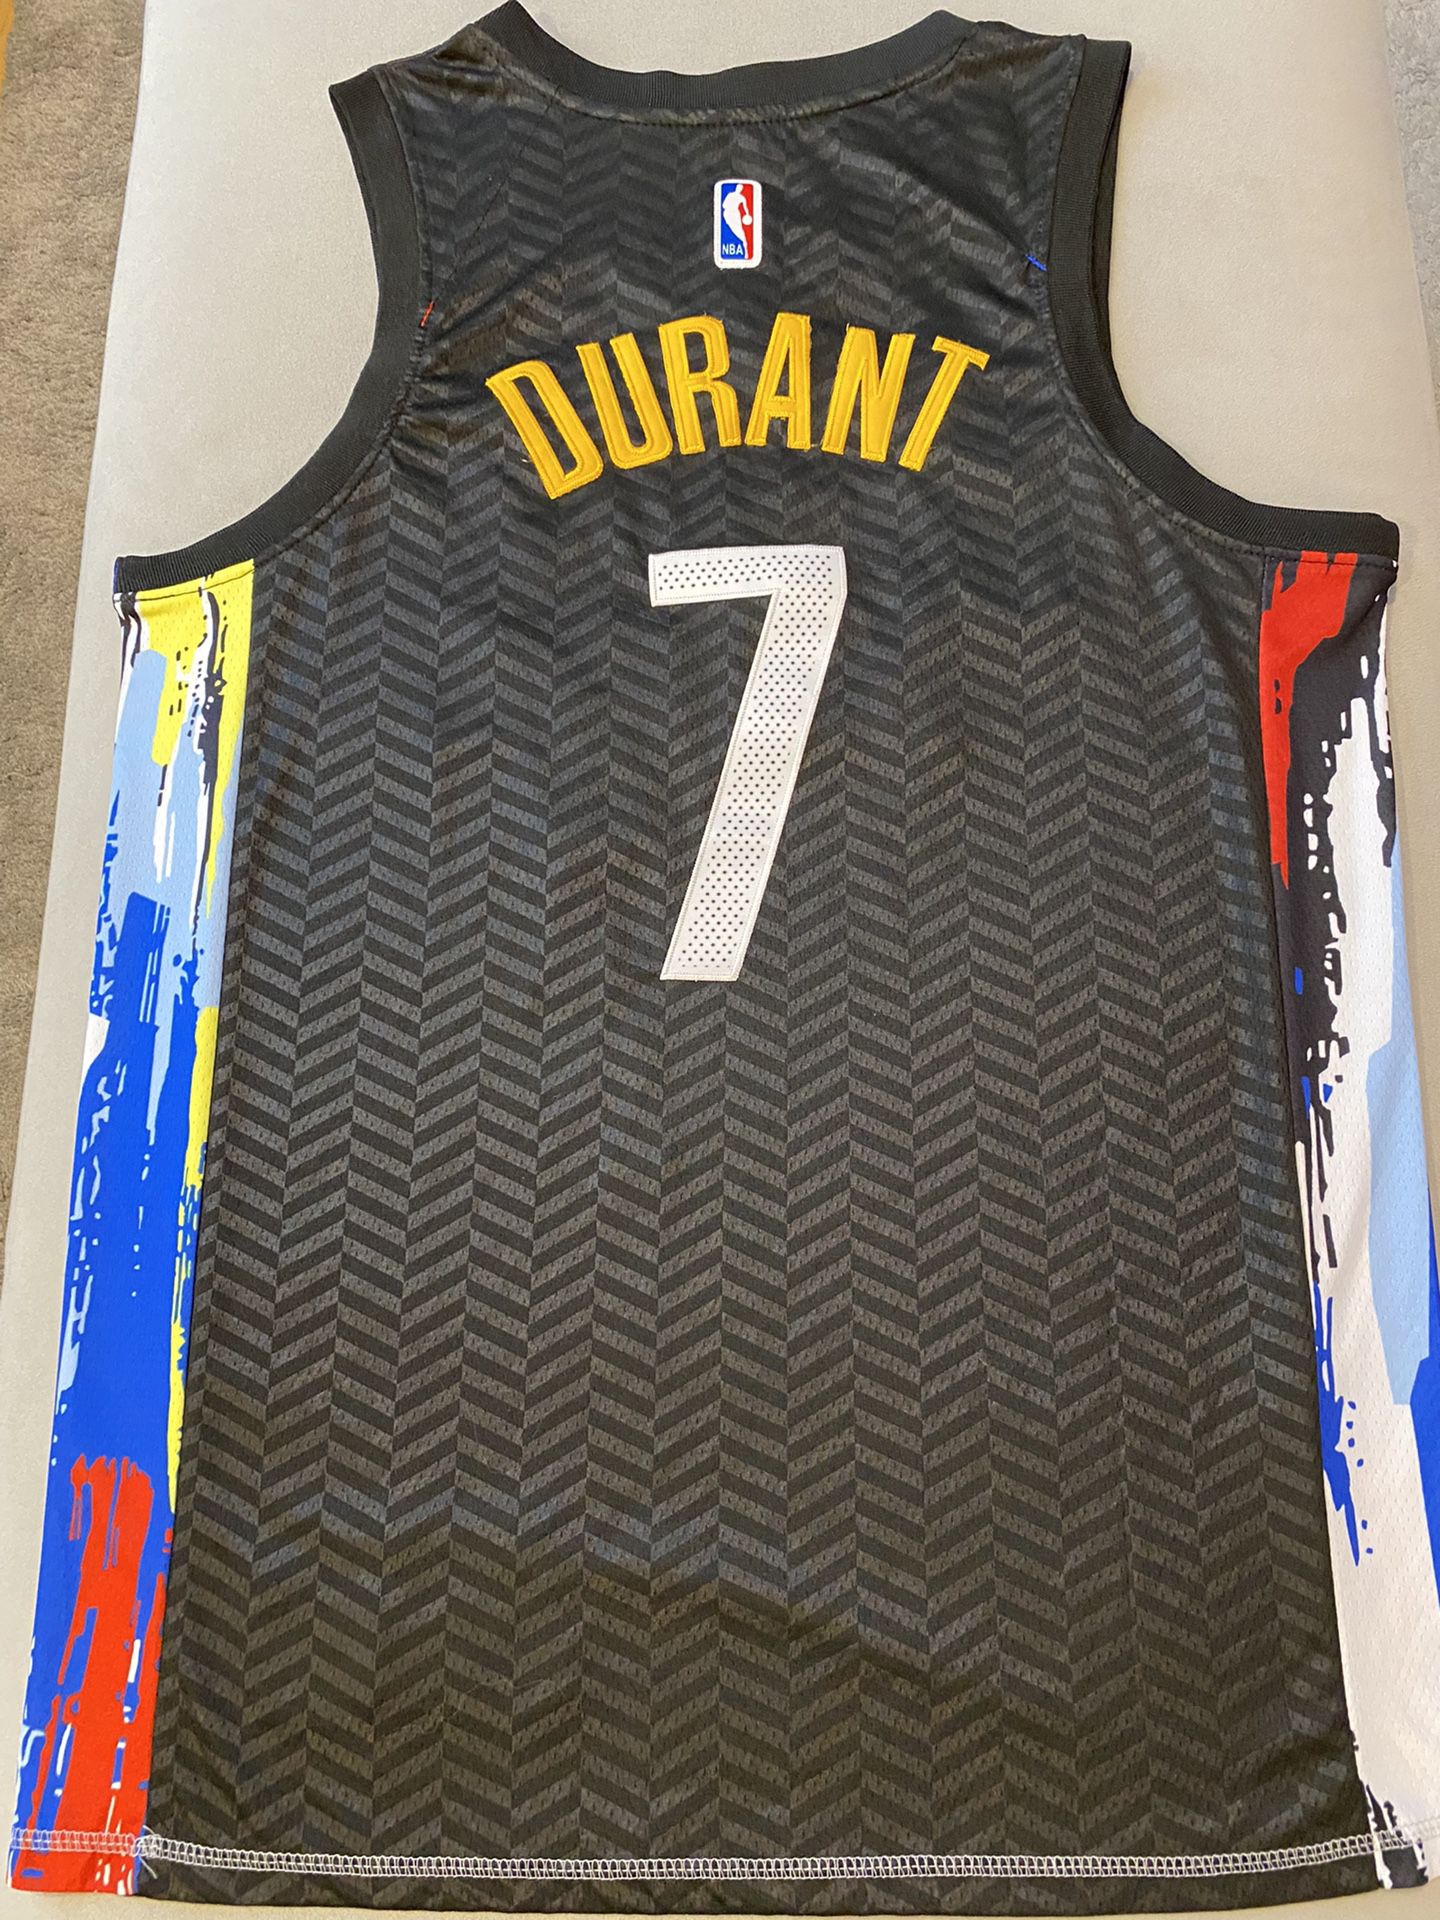 Kevin durant Sonics Jersey small for Sale in Puyallup, WA - OfferUp